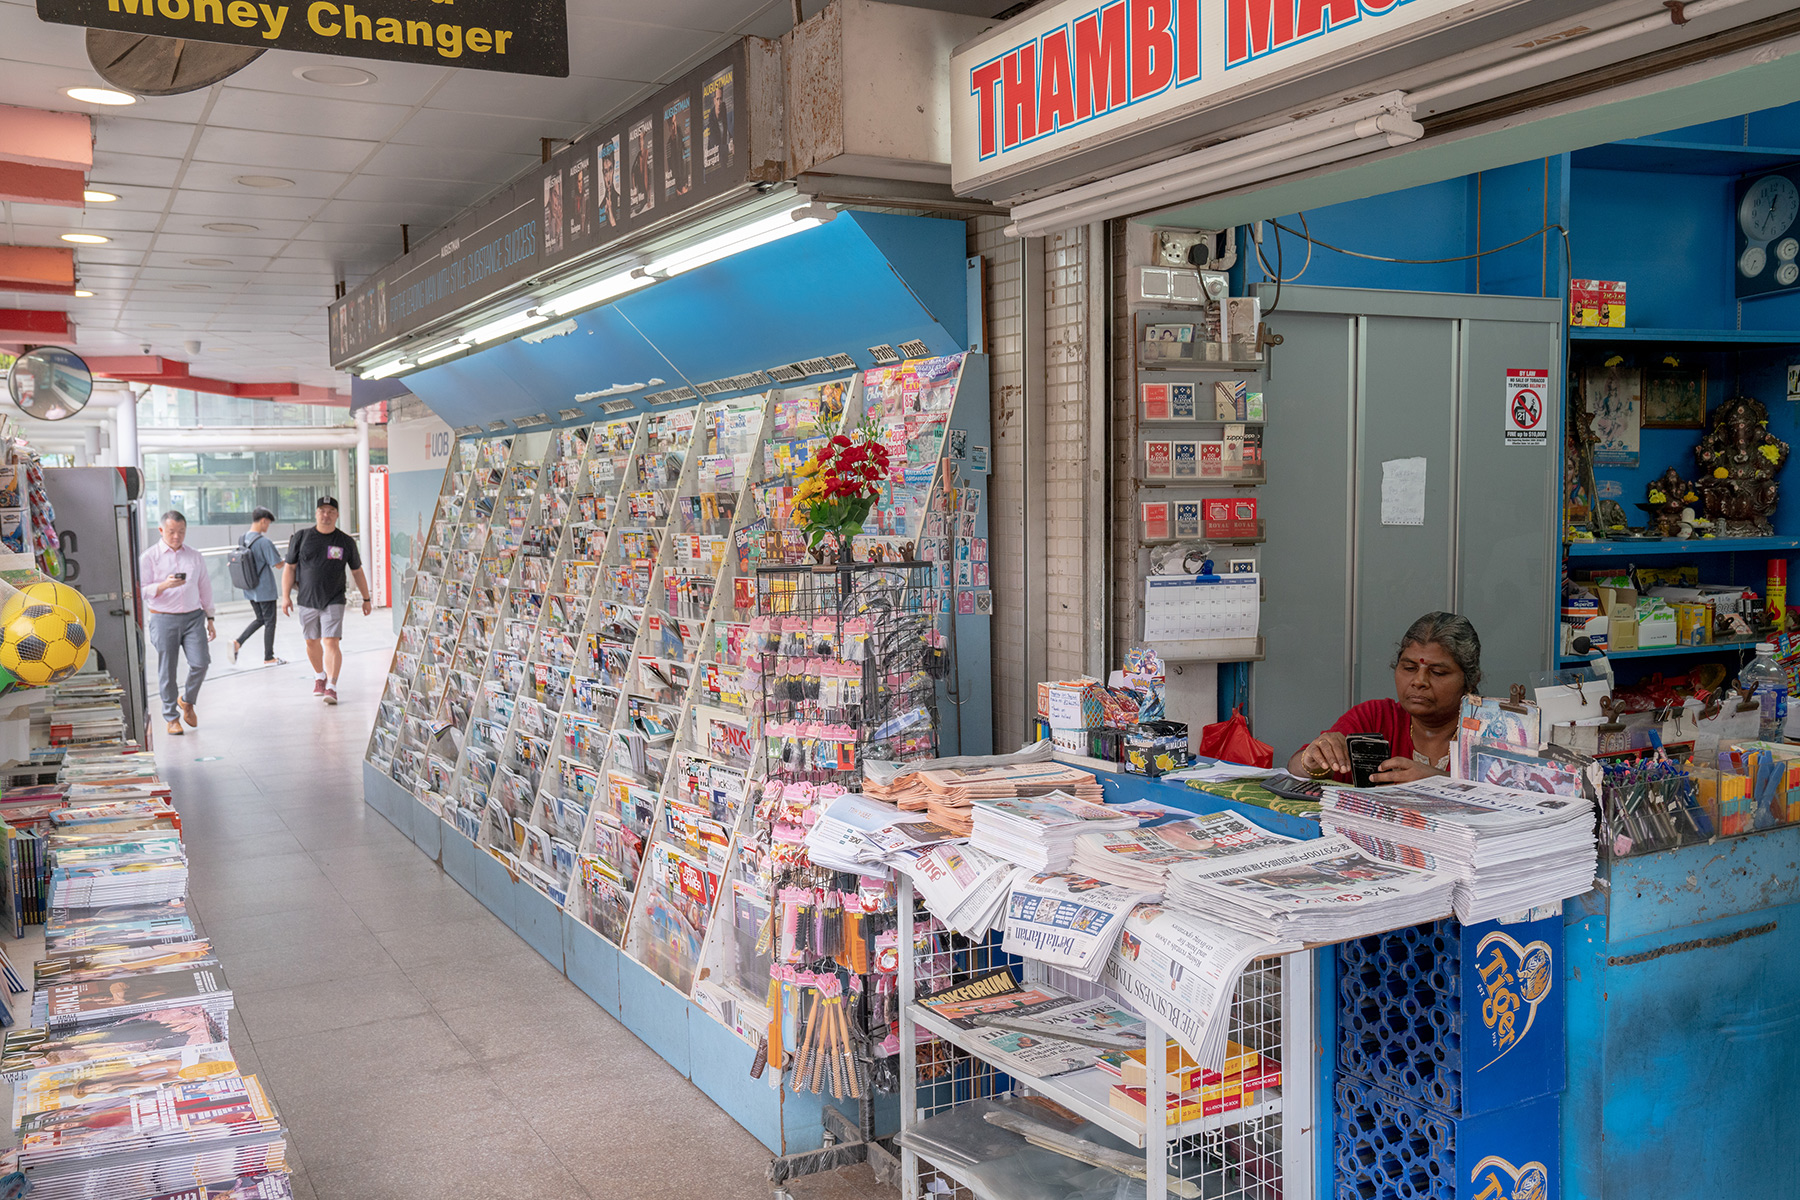 A woman selling magazines and newspapers at a newsagent.